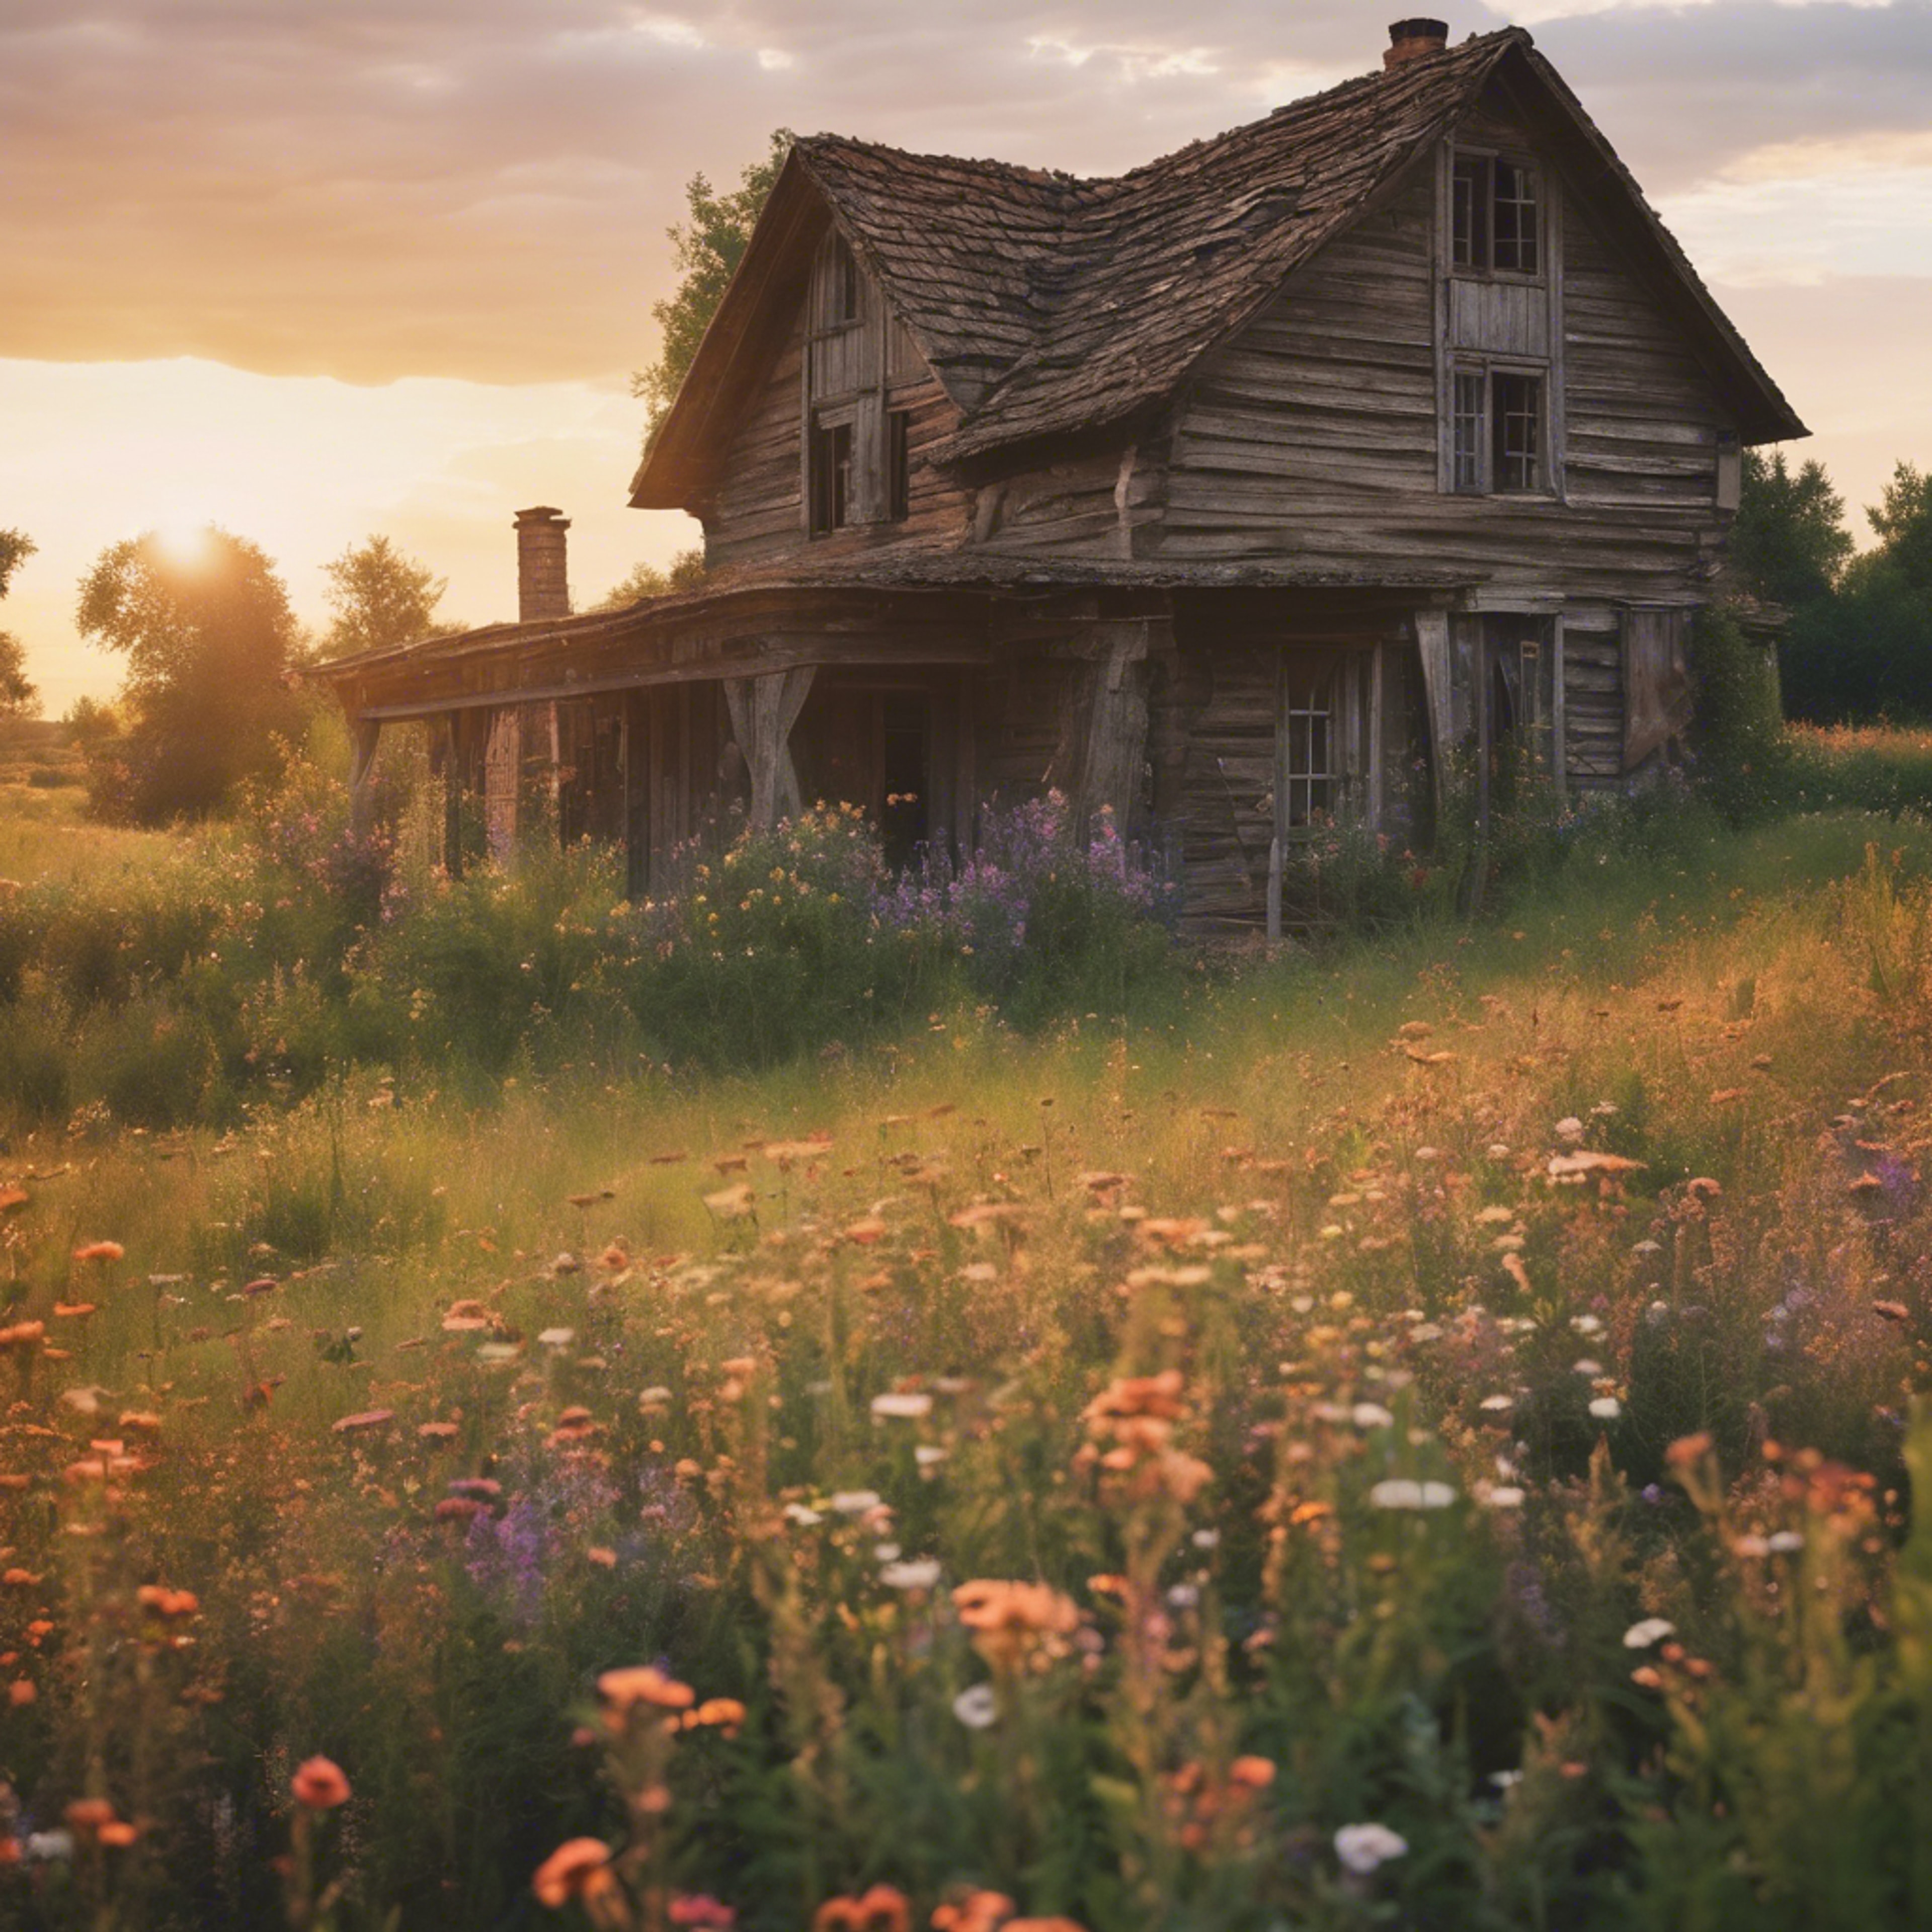 An old, rustic farmhouse nestled in a peaceful countryside filled with wildflowers under the warm evening sky evoking a sense of peaceful nostalgia. Wallpaper[69734339127742a48dc2]